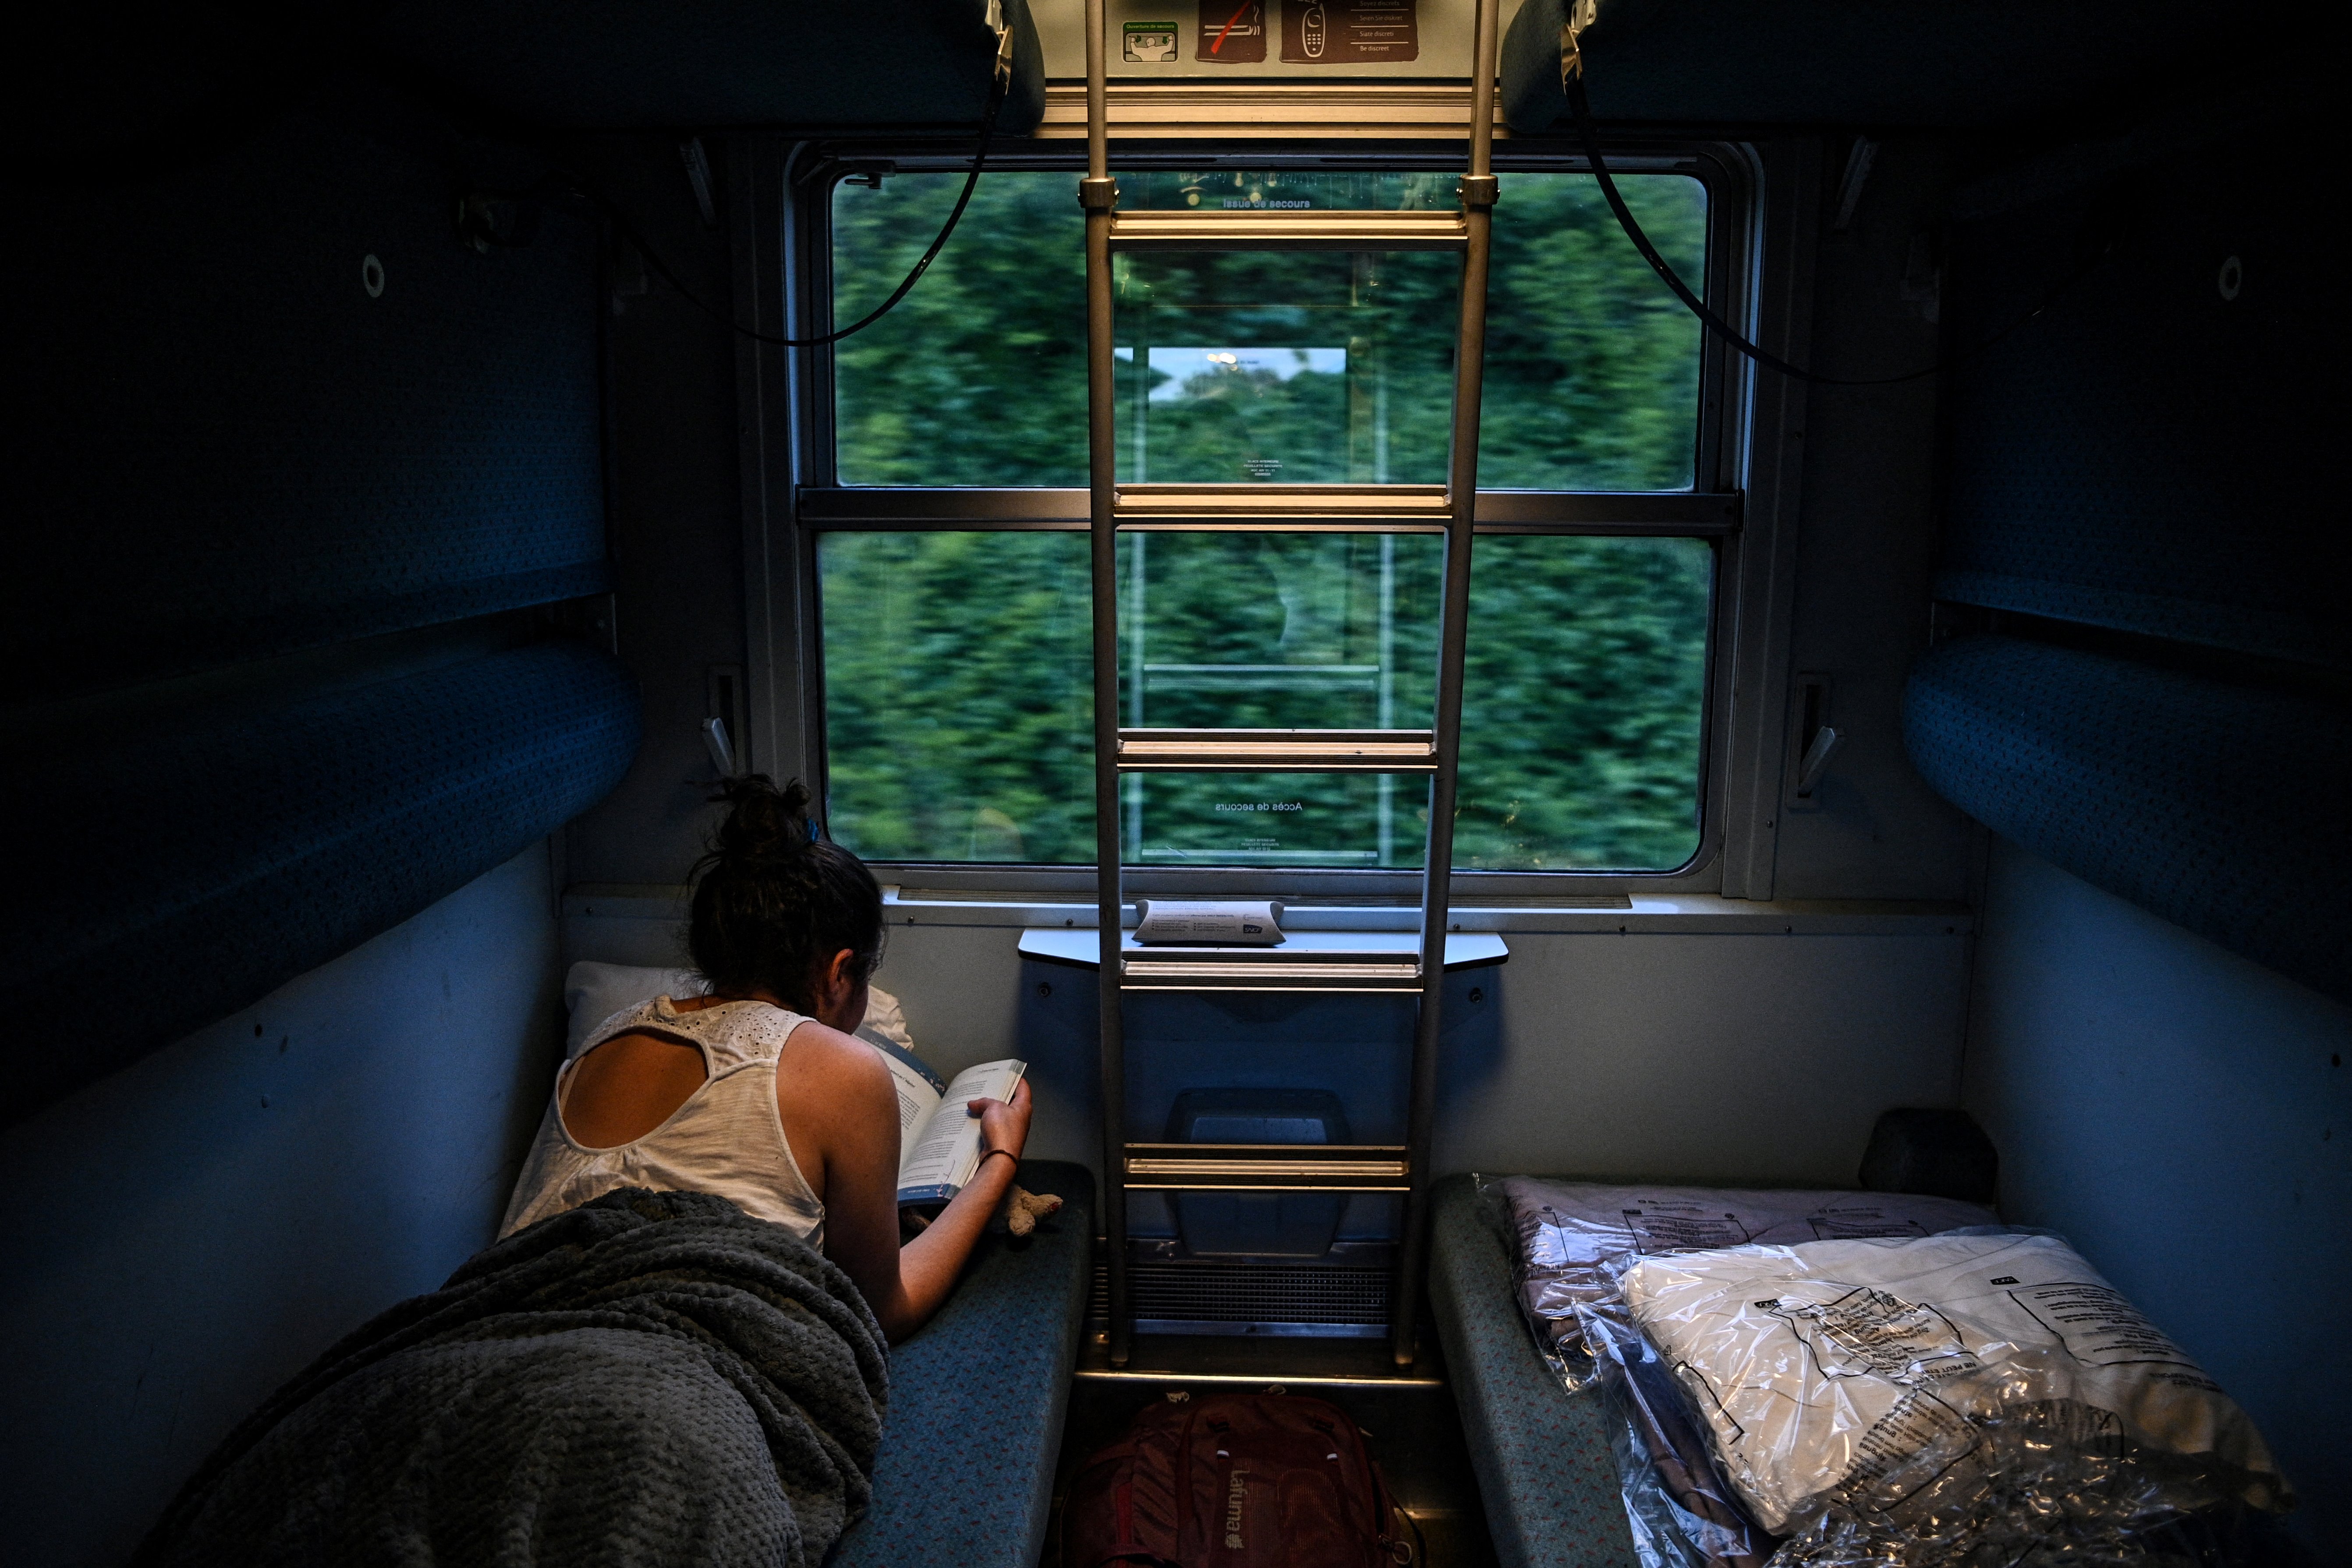 Tan recommends everyone try using a sleeper train at least once